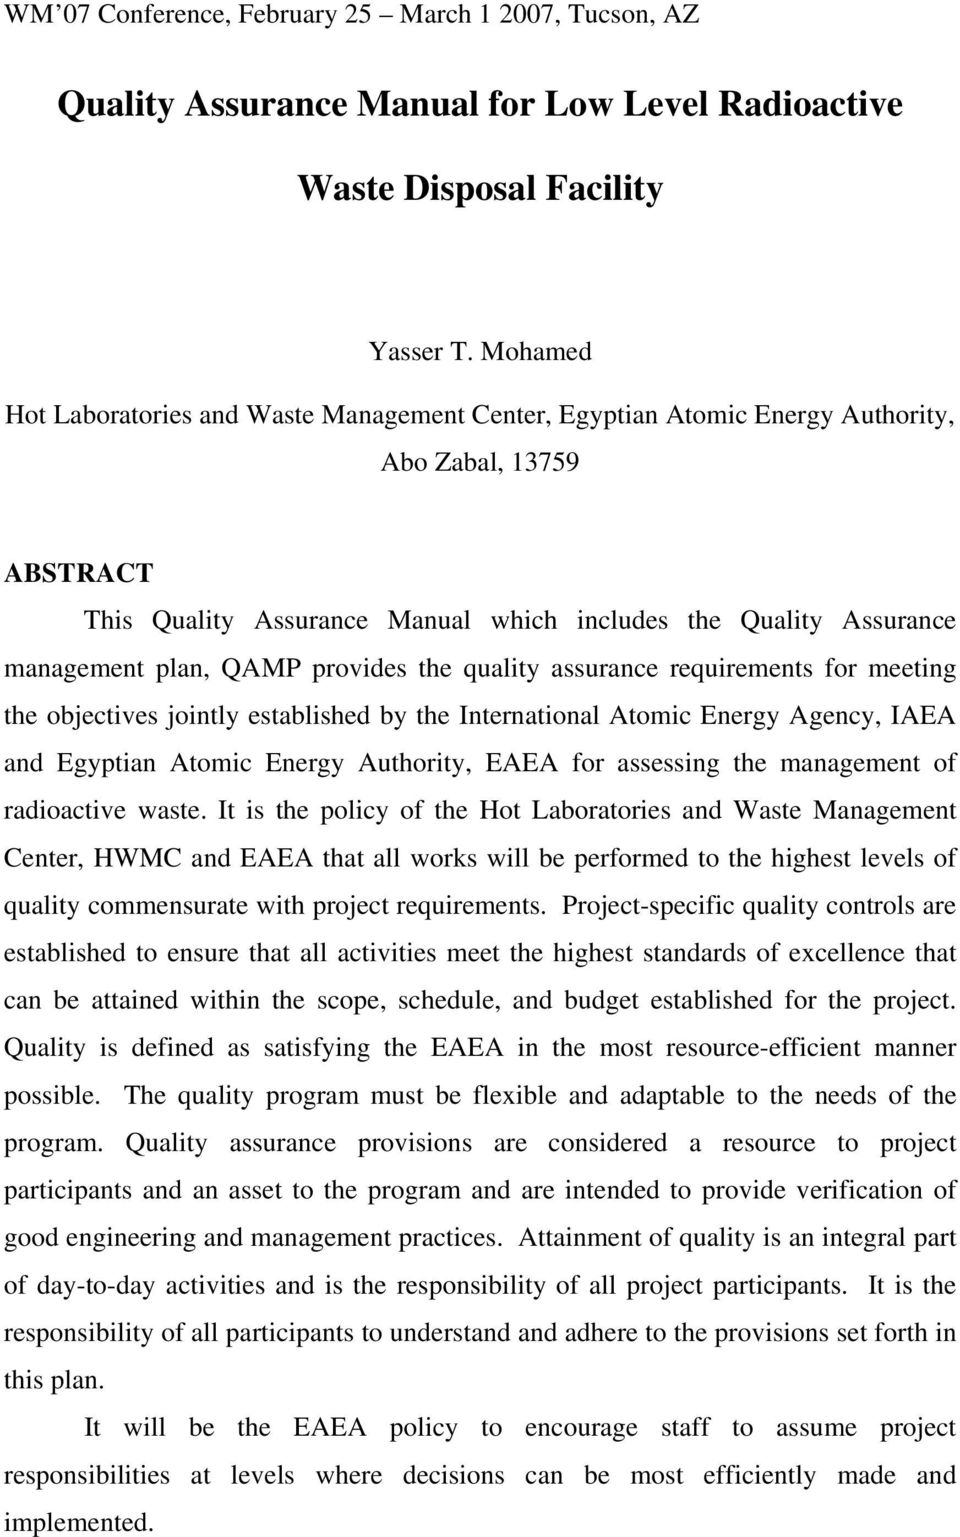 QAMP provides the quality assurance requirements for meeting the objectives jointly established by the International Atomic Energy Agency, IAEA and Egyptian Atomic Energy Authority, EAEA for